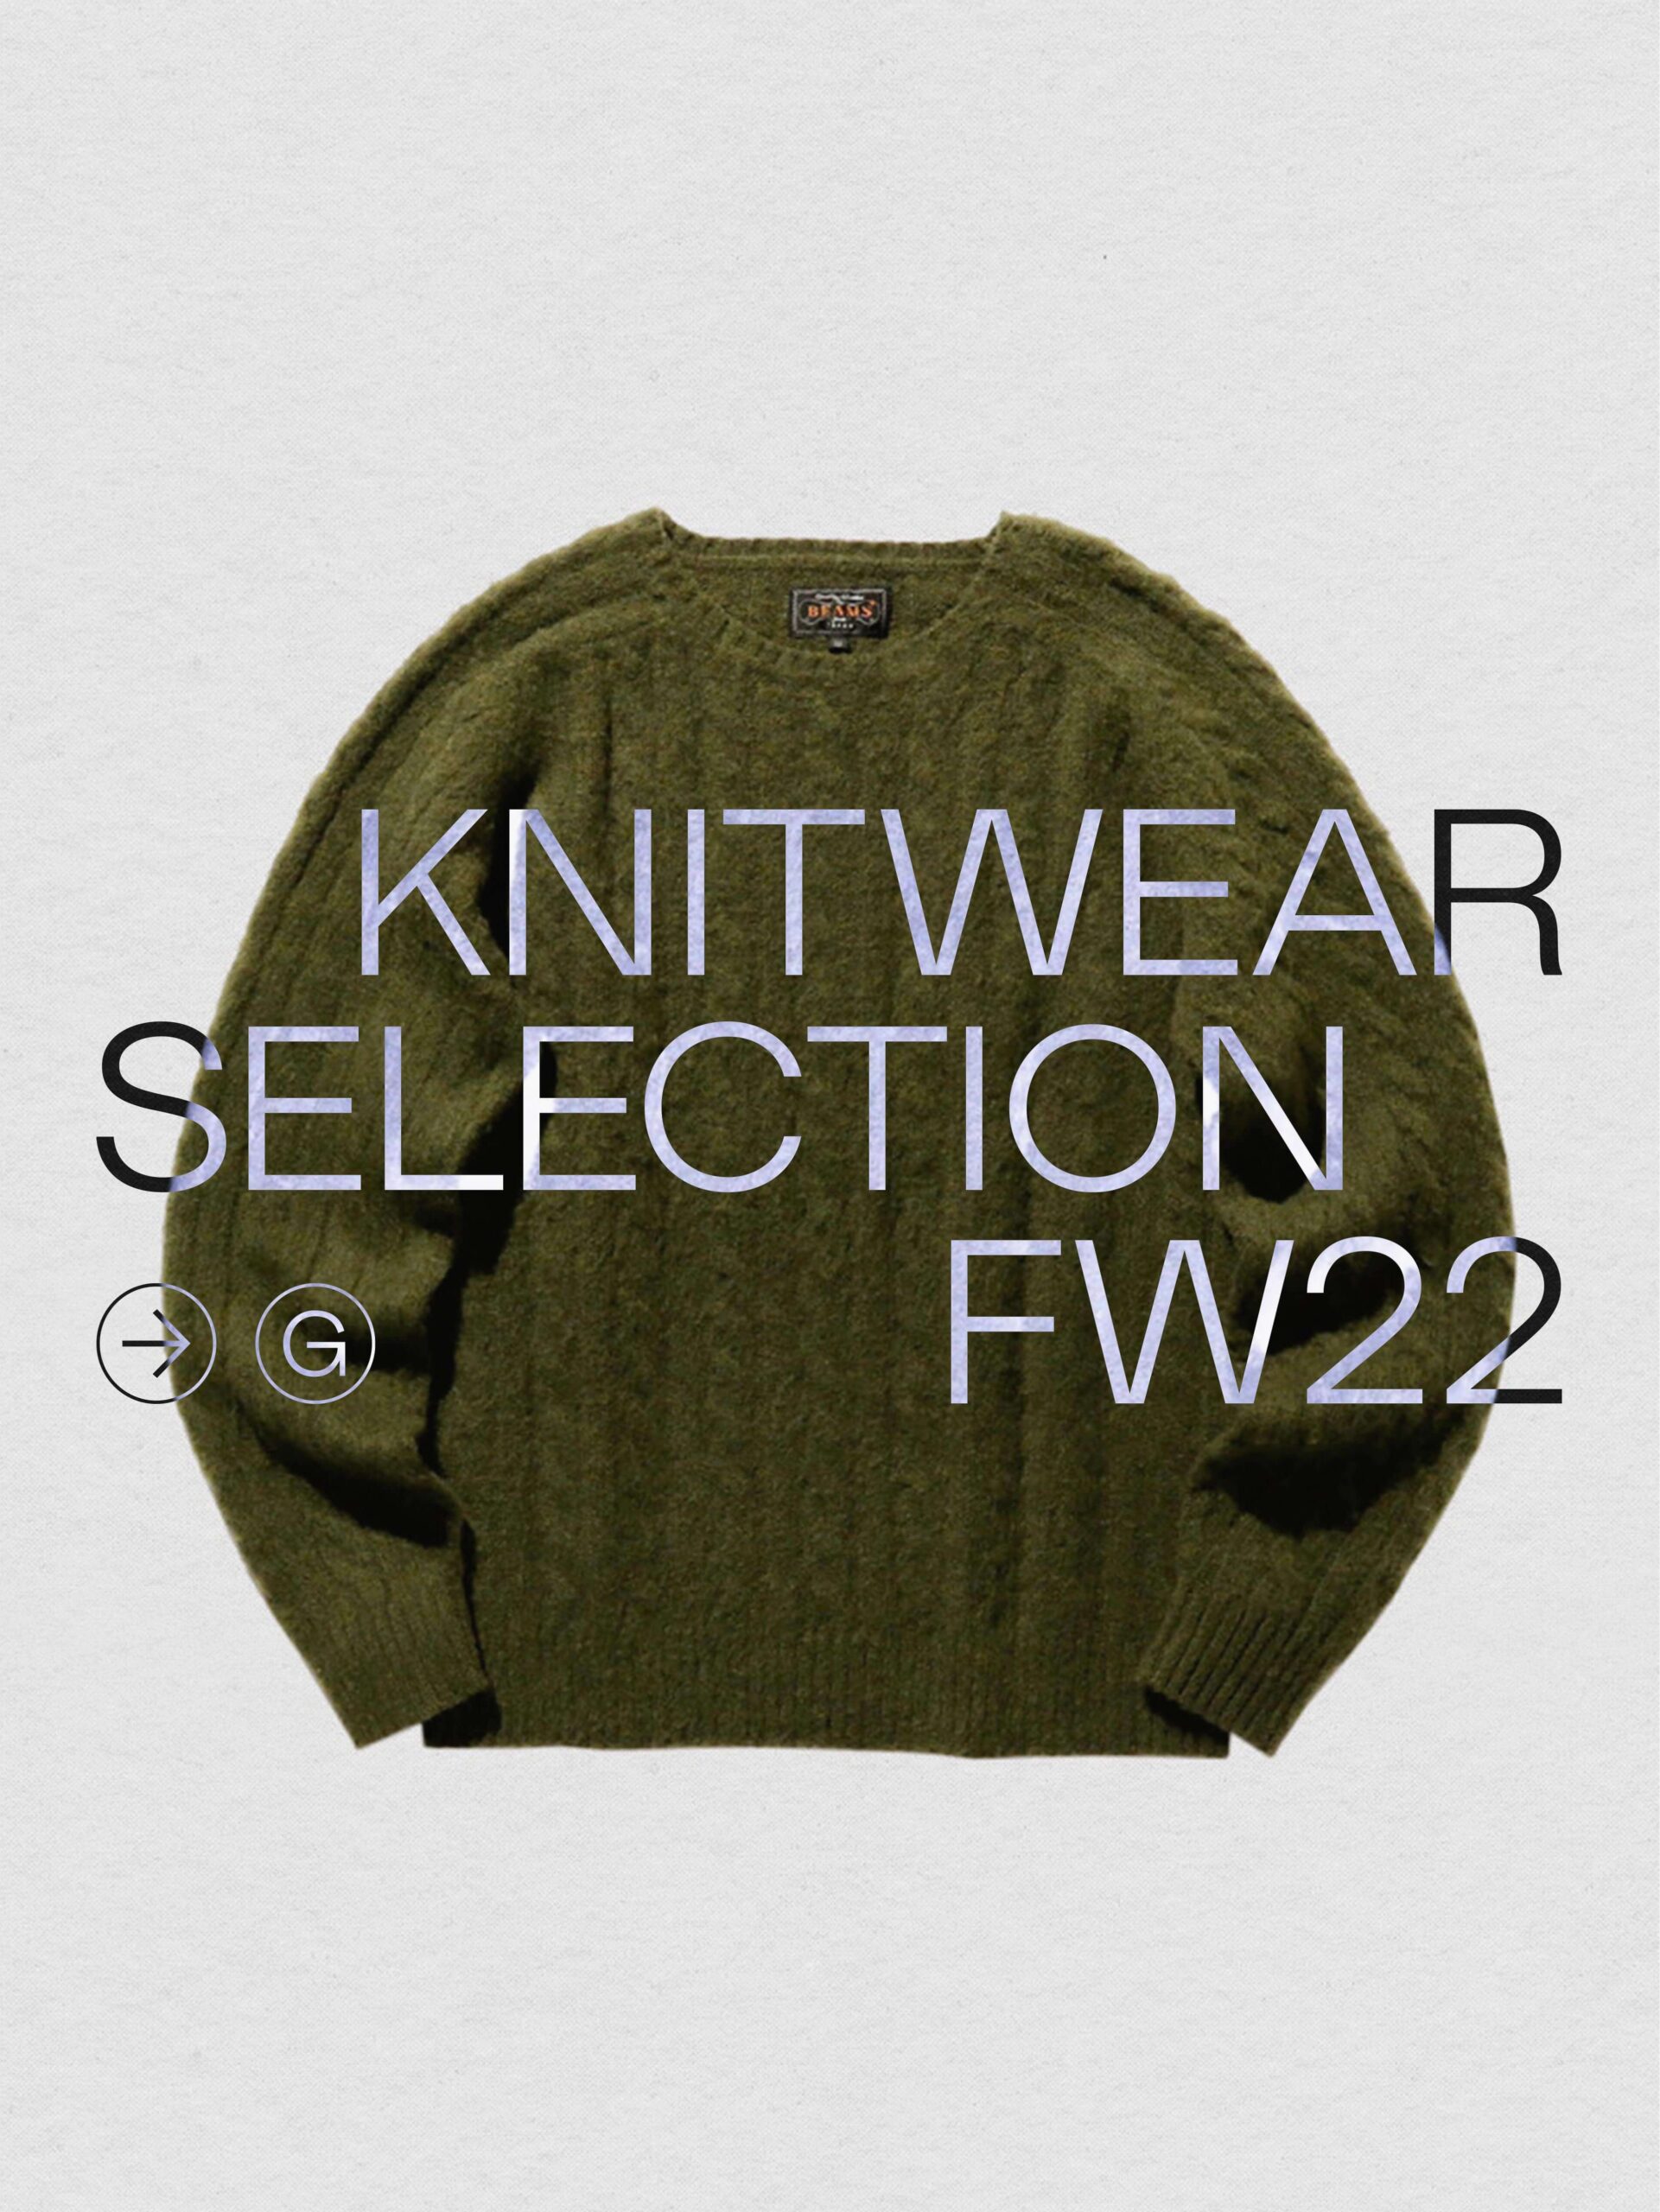 OUR KNITWEAR SELECTION